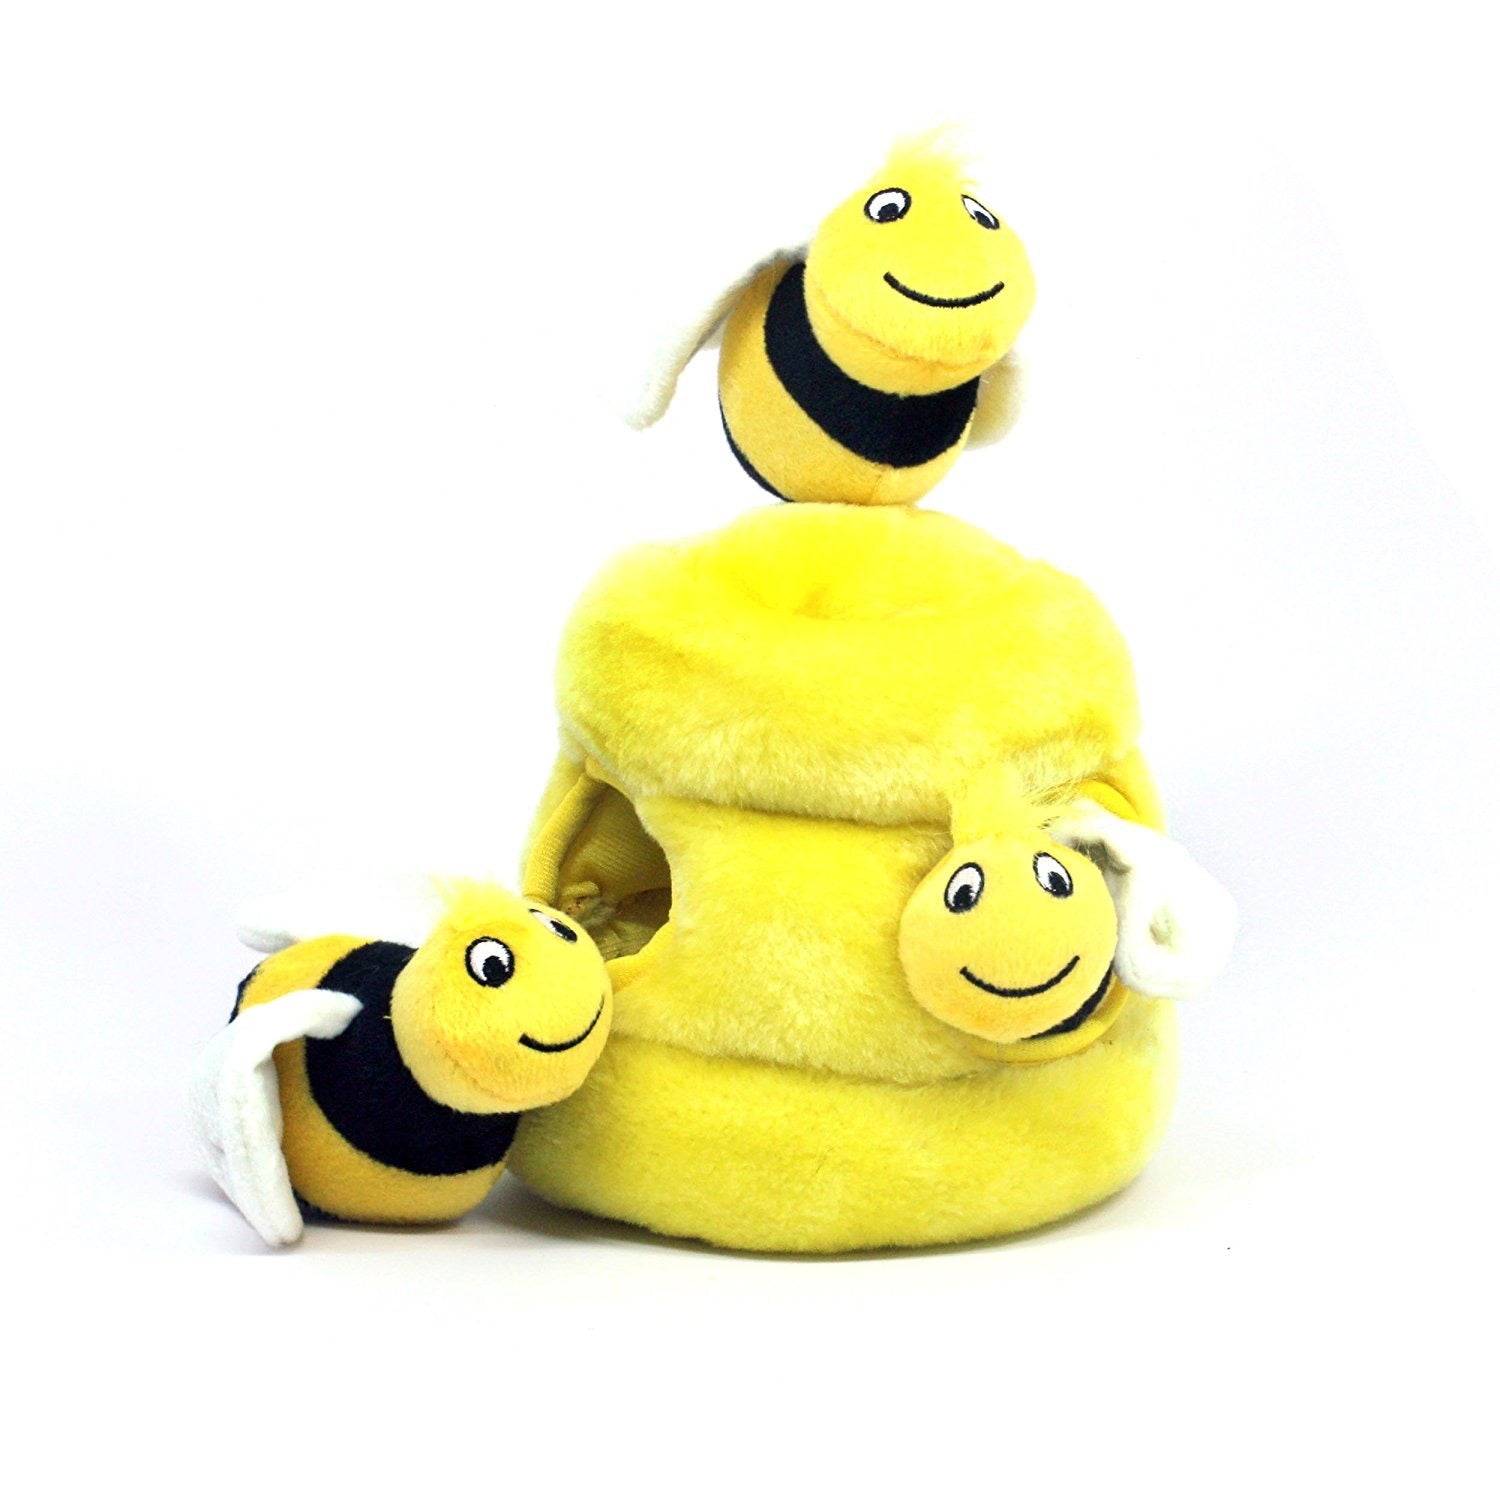 Plush Toy -Interactive Toy - Hide-A-Bee - Dog Toy - Dog Puzzle